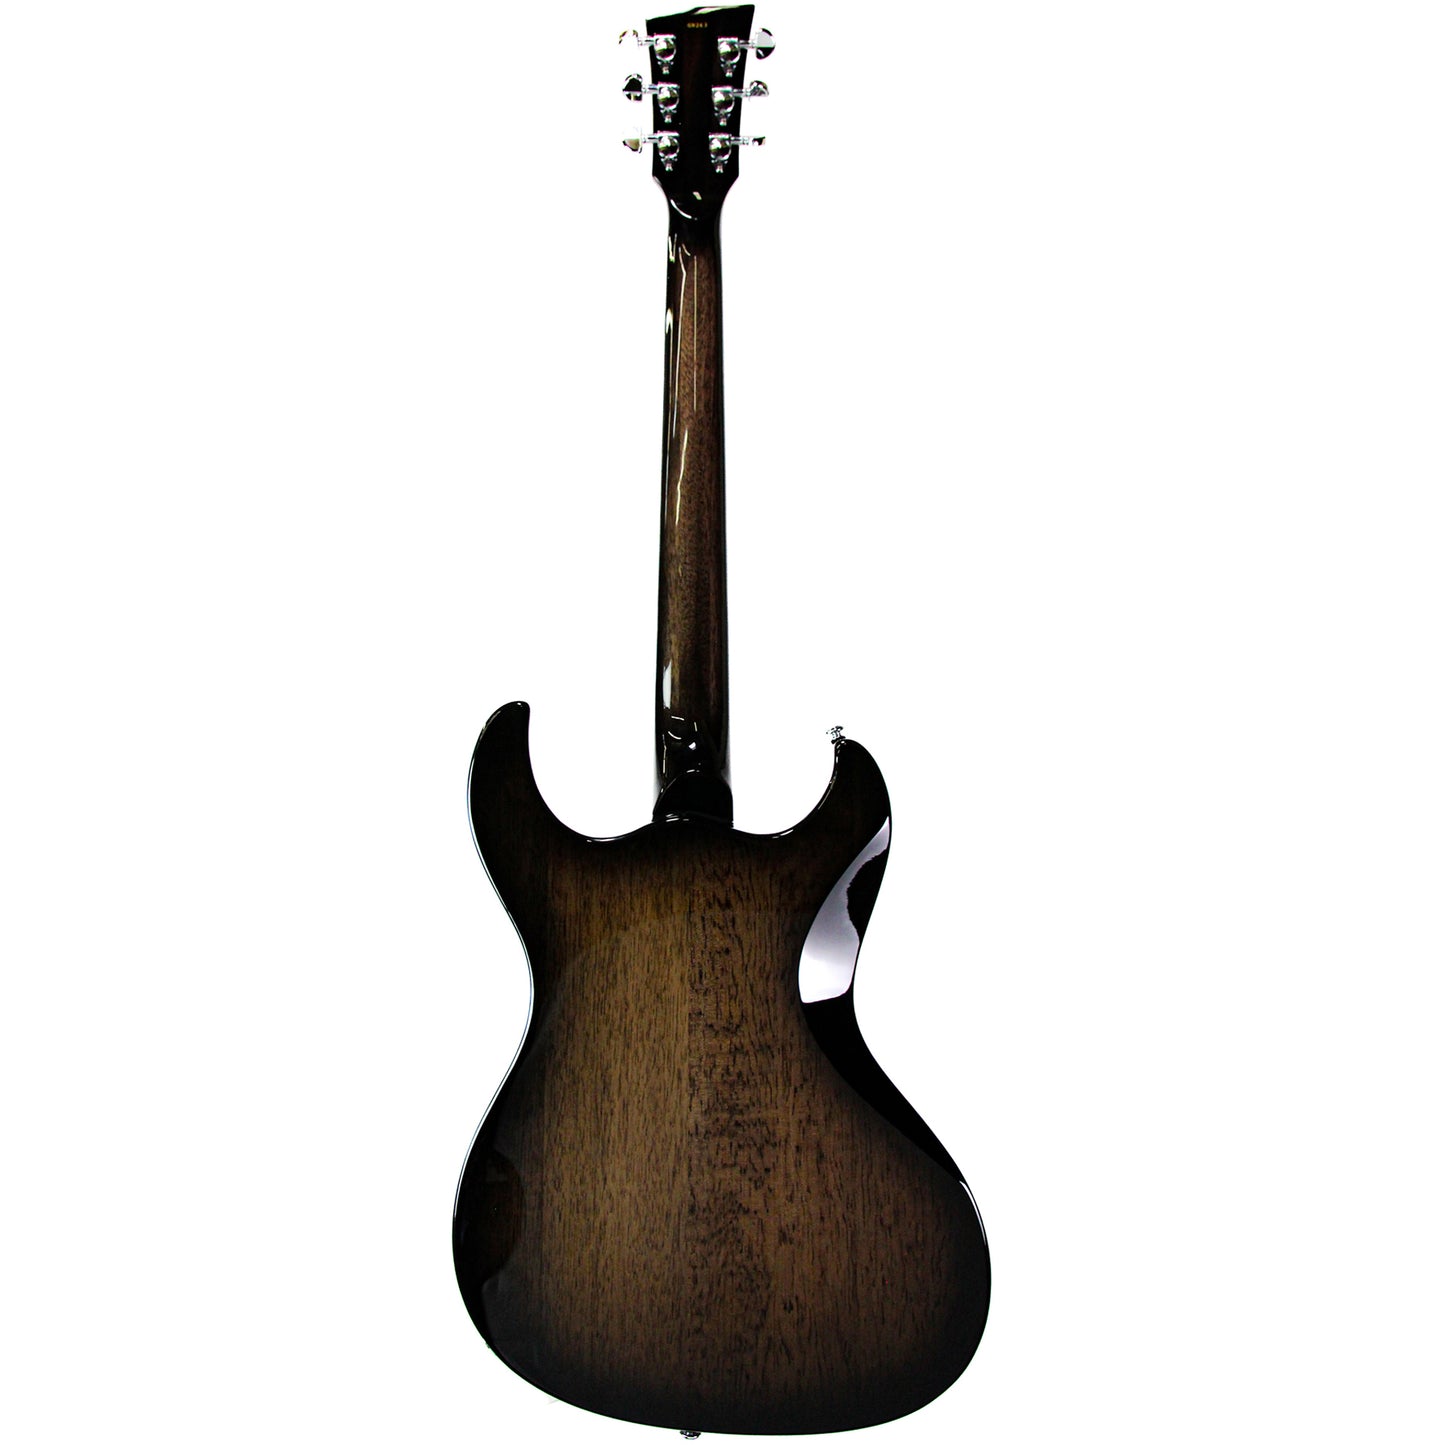 Dunable Gnarwhal DE Electric Guitar - Charcoal Burst